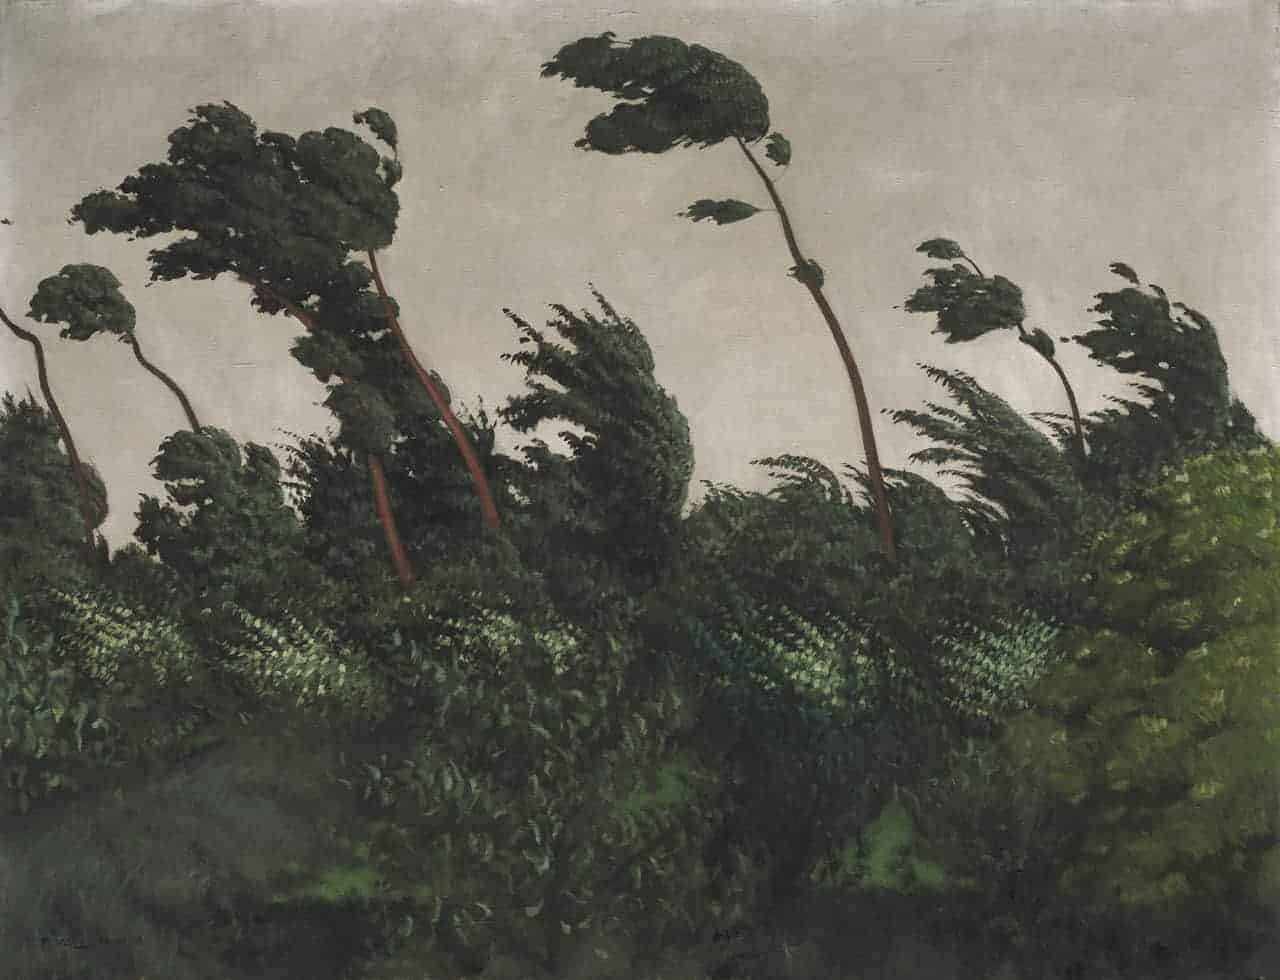 Titian Ramsay Peale, Spray of Flowers and Ferns, date unknown, National Gallery of Art (article on gratitude)